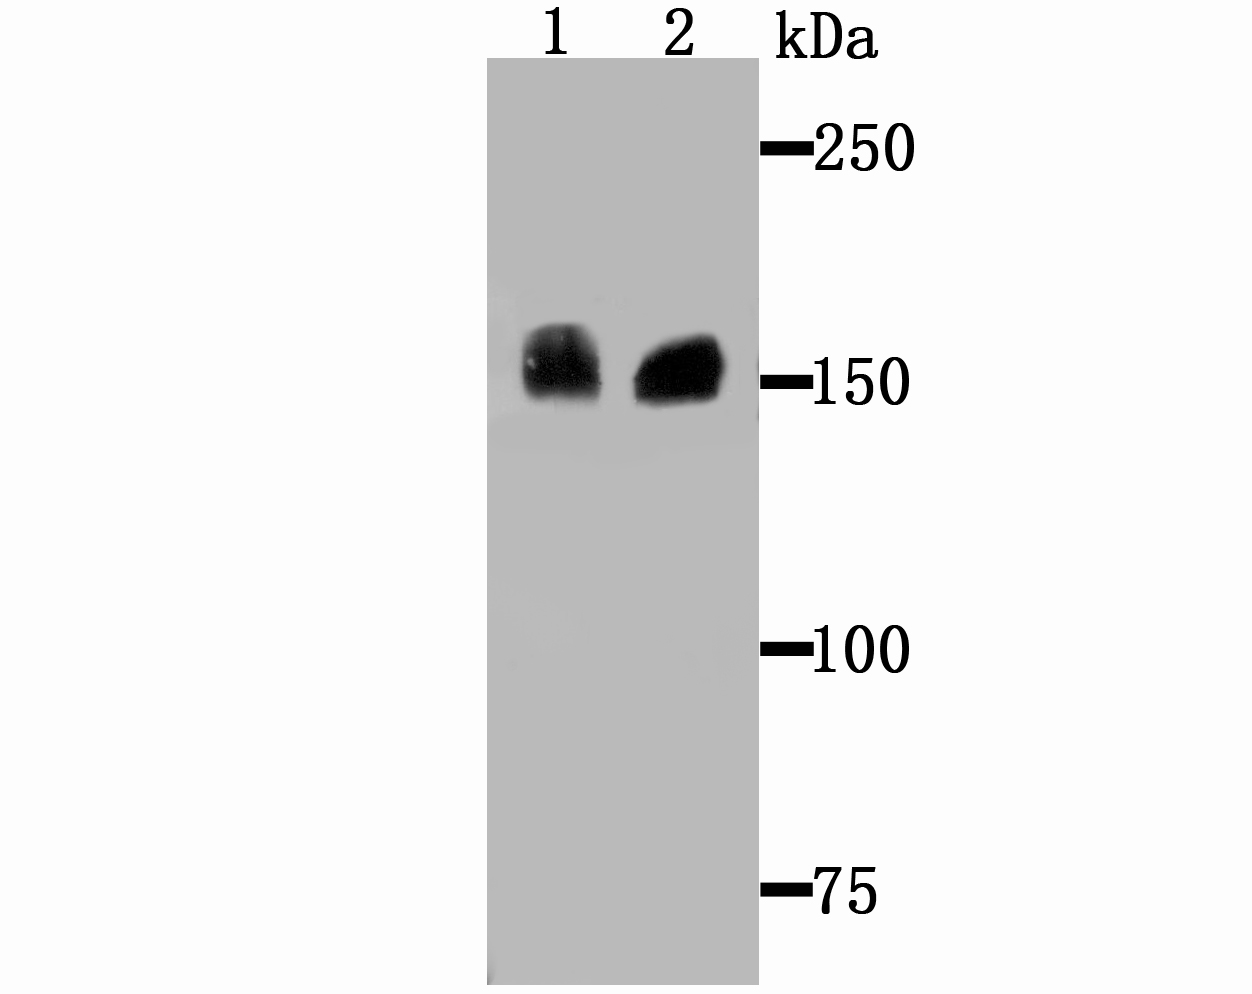 Western blot analysis of Drosha on different lysates. Proteins were transferred to a PVDF membrane and blocked with 5% BSA in PBS for 1 hour at room temperature. The primary antibody (ET1706-34, 1/500) was used in 5% BSA at room temperature for 2 hours. Goat Anti-Rabbit IgG - HRP Secondary Antibody (HA1001) at 1:200,000 dilution was used for 1 hour at room temperature.<br />
Positive control: <br />
Lane 1: Hela cell lysate<br />
Lane 2: SiHa cell lysate